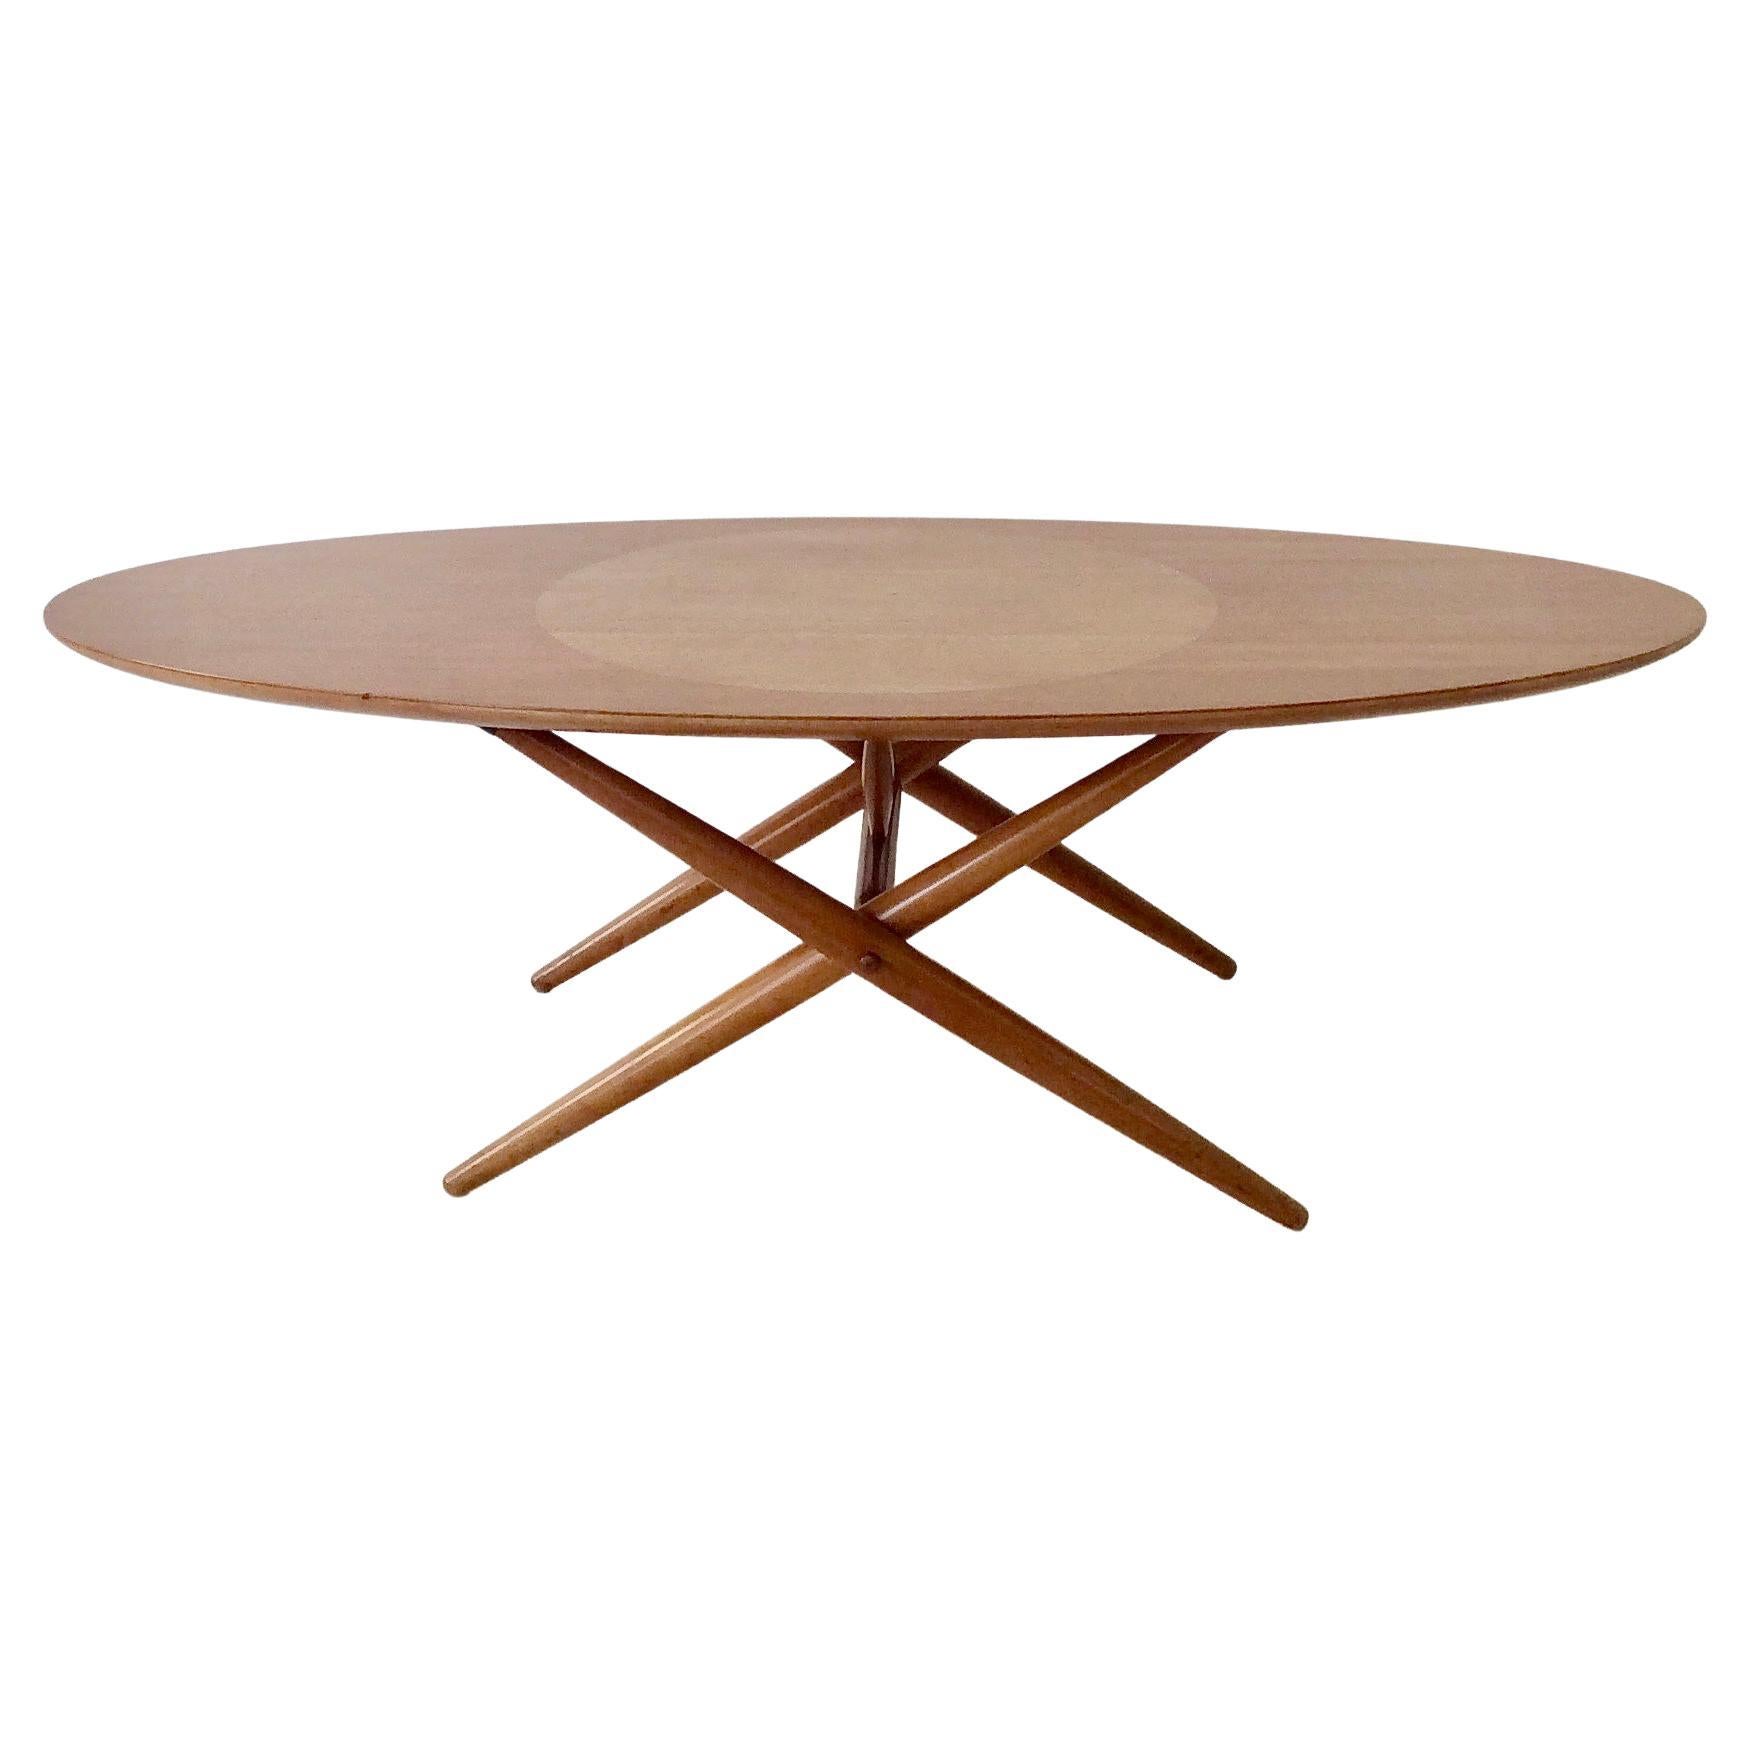 Rare version of Ovalette model coffee table by Ilmari Tapiovaara for Asko Oy Lahti, circa 1954, Finland.
Beech table top with large birch circle inlay. 
 Solid wood crossed-legged.
Dimensions: 120 cm W, 60 cm D, 40 cm H.
Good original condition,